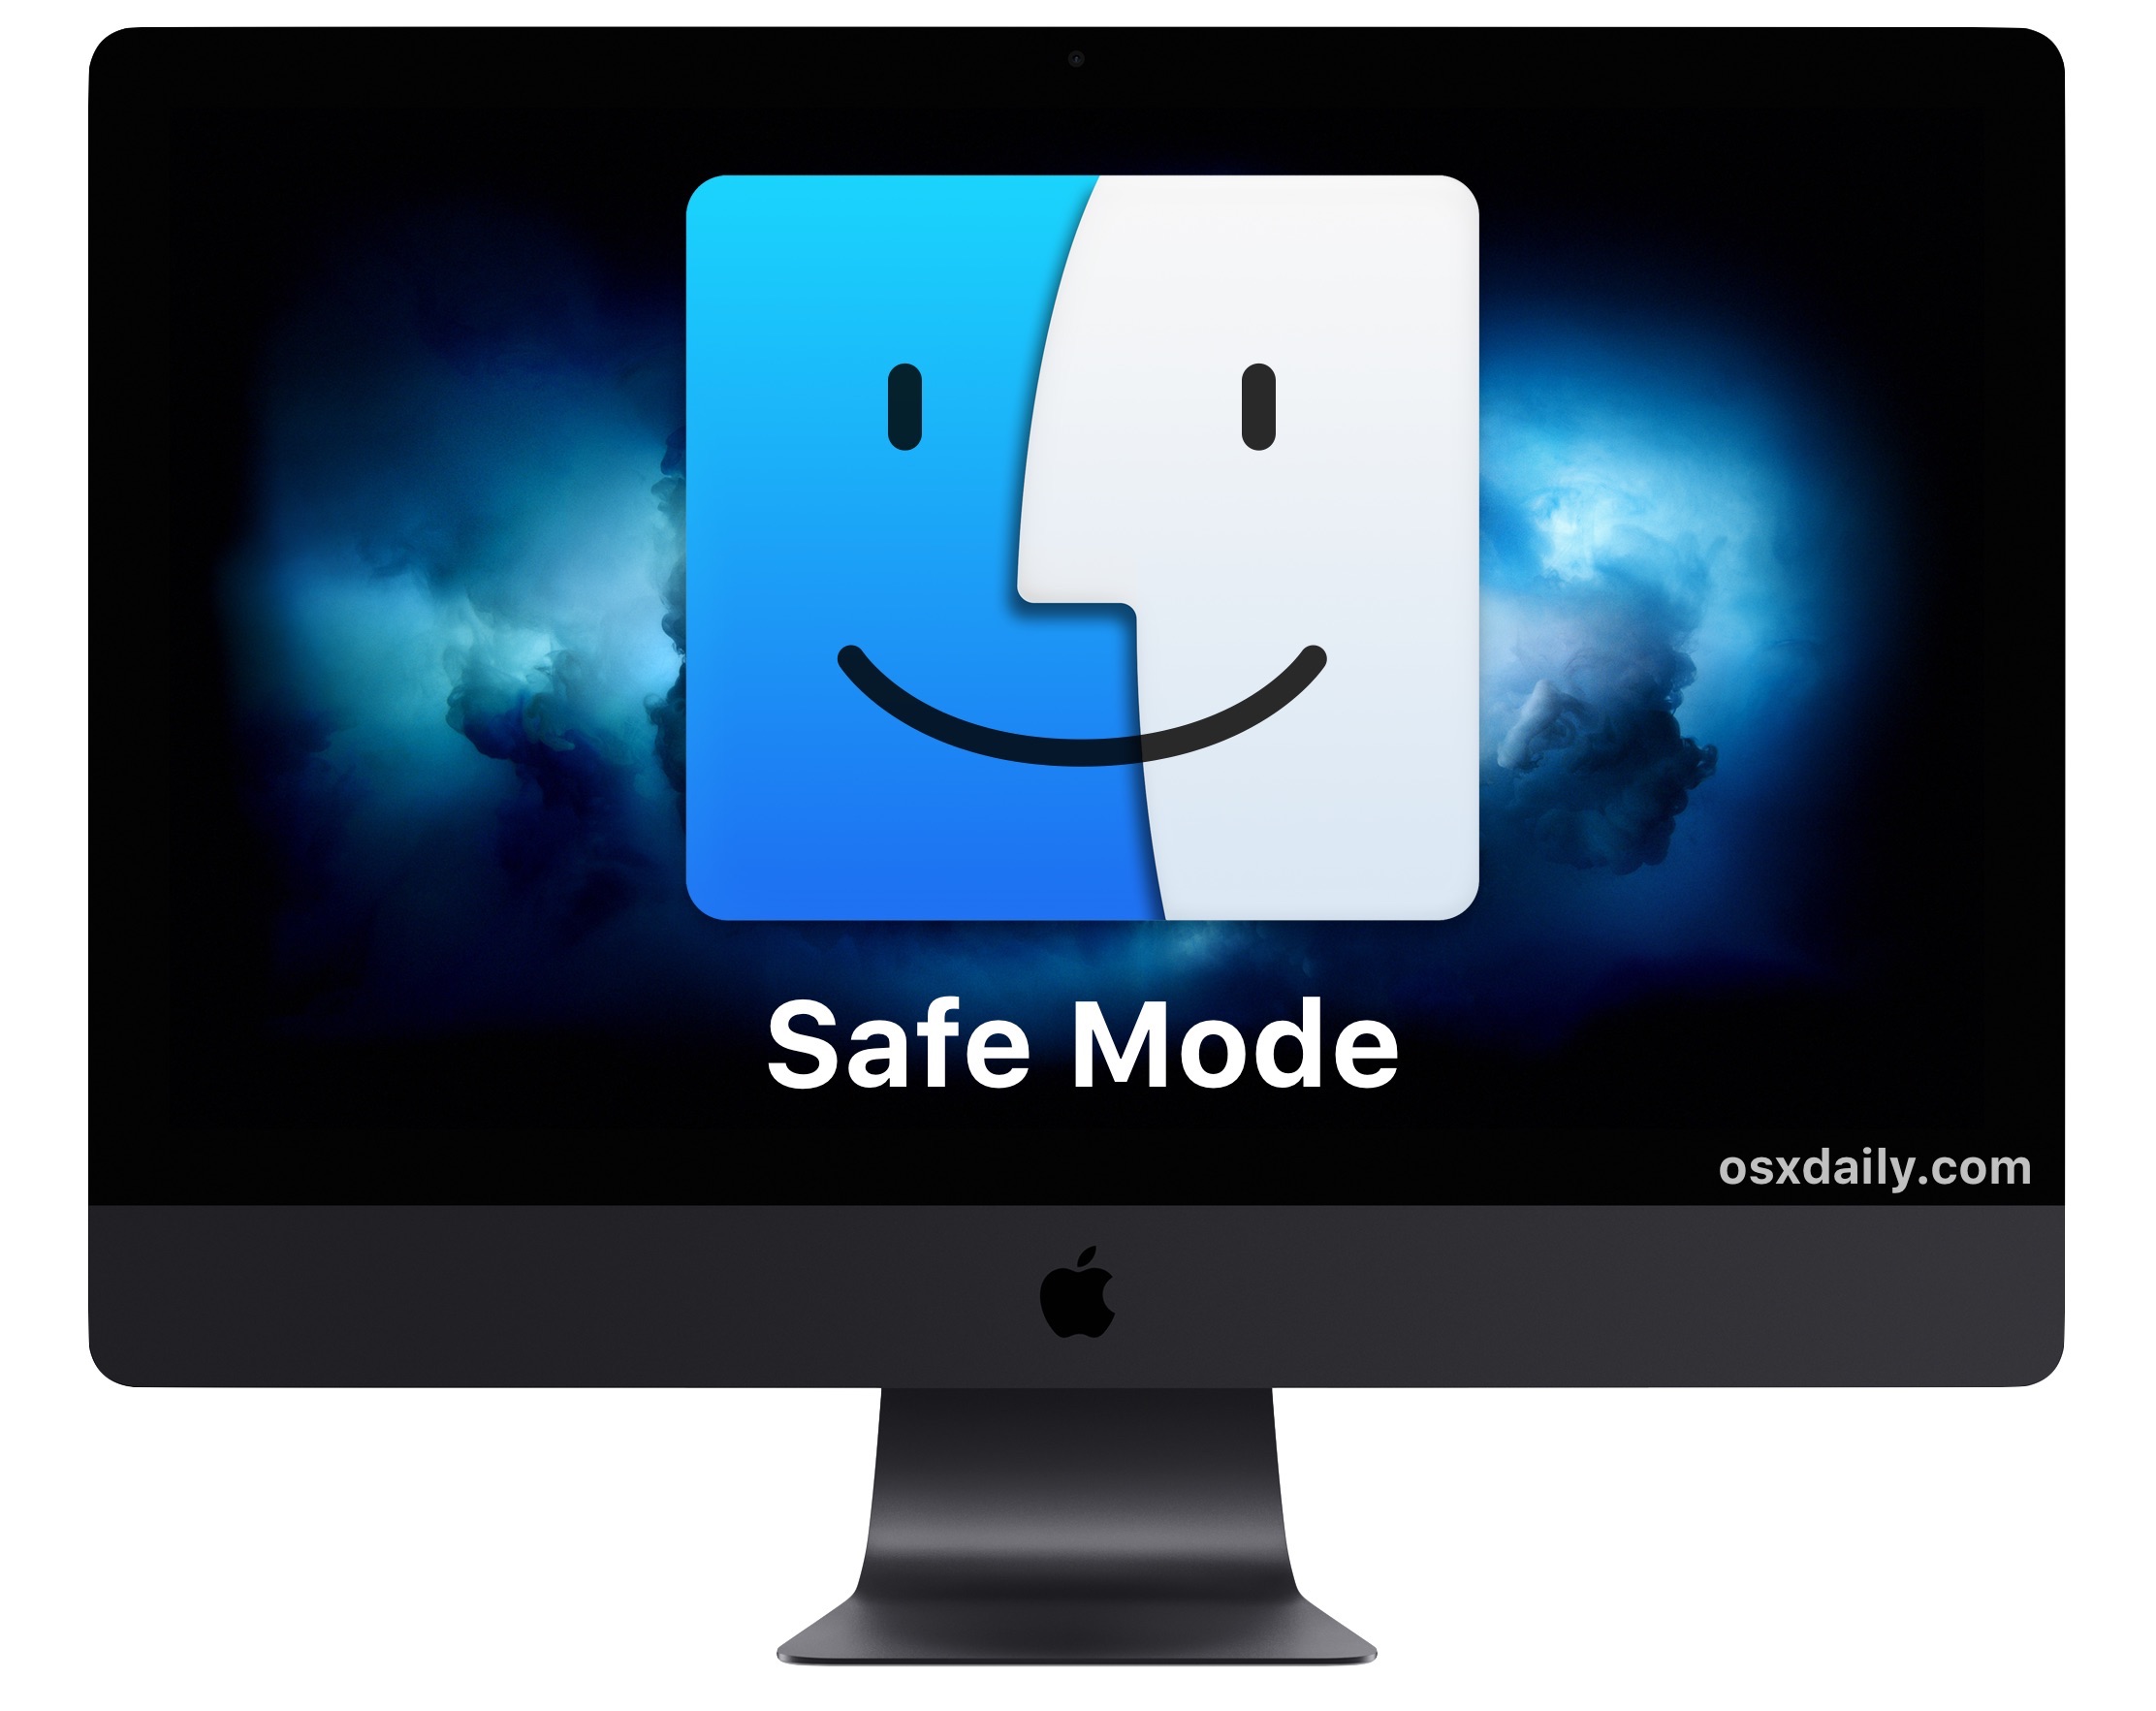 mac will only boot into safe mode